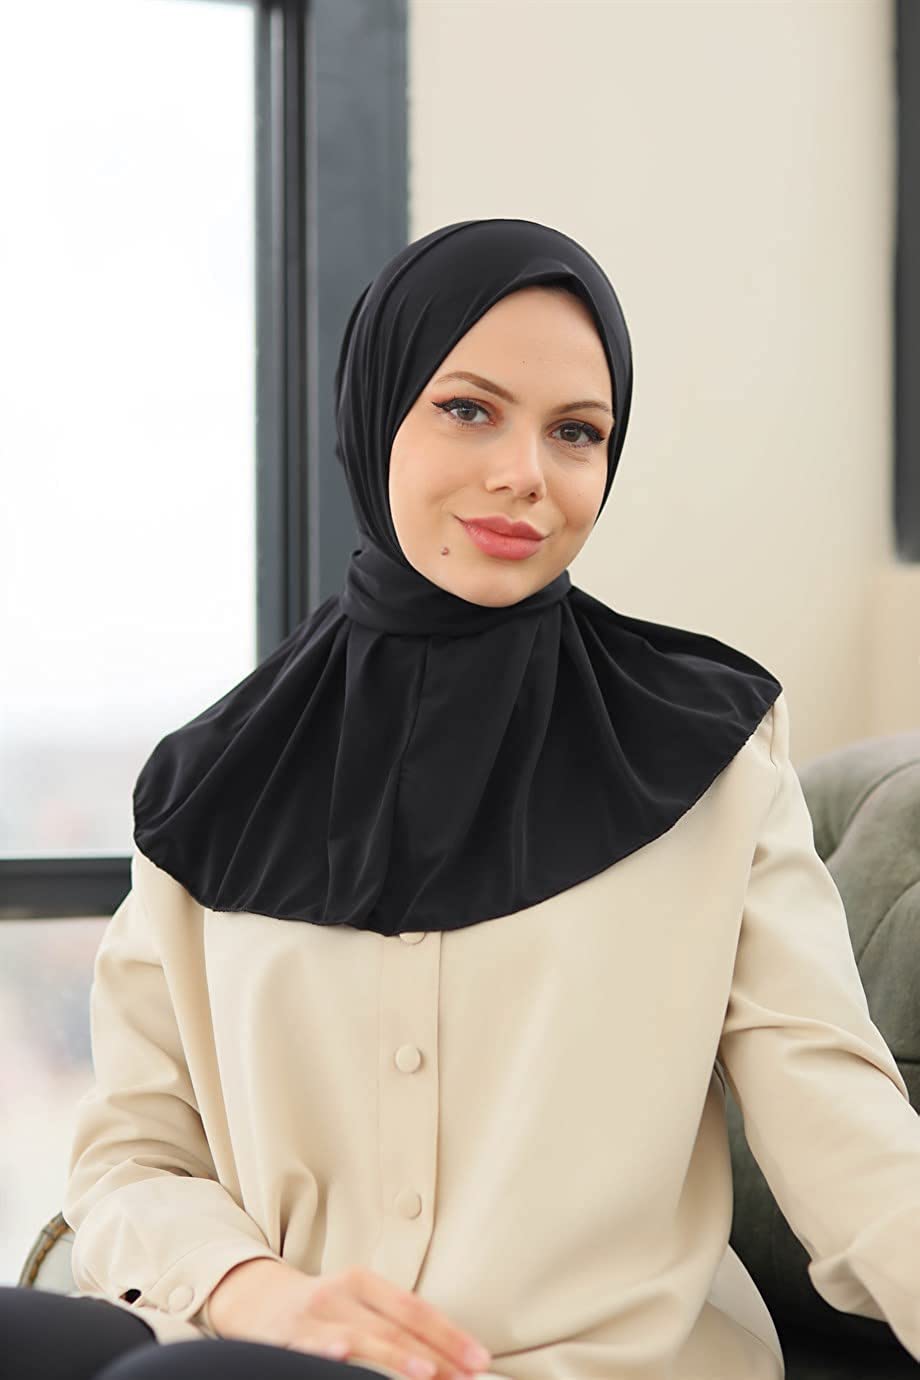 Marwa Fashion Muslim Hijab for Women - Premium Quality Hijab Scarves for Women Made up of Polyester